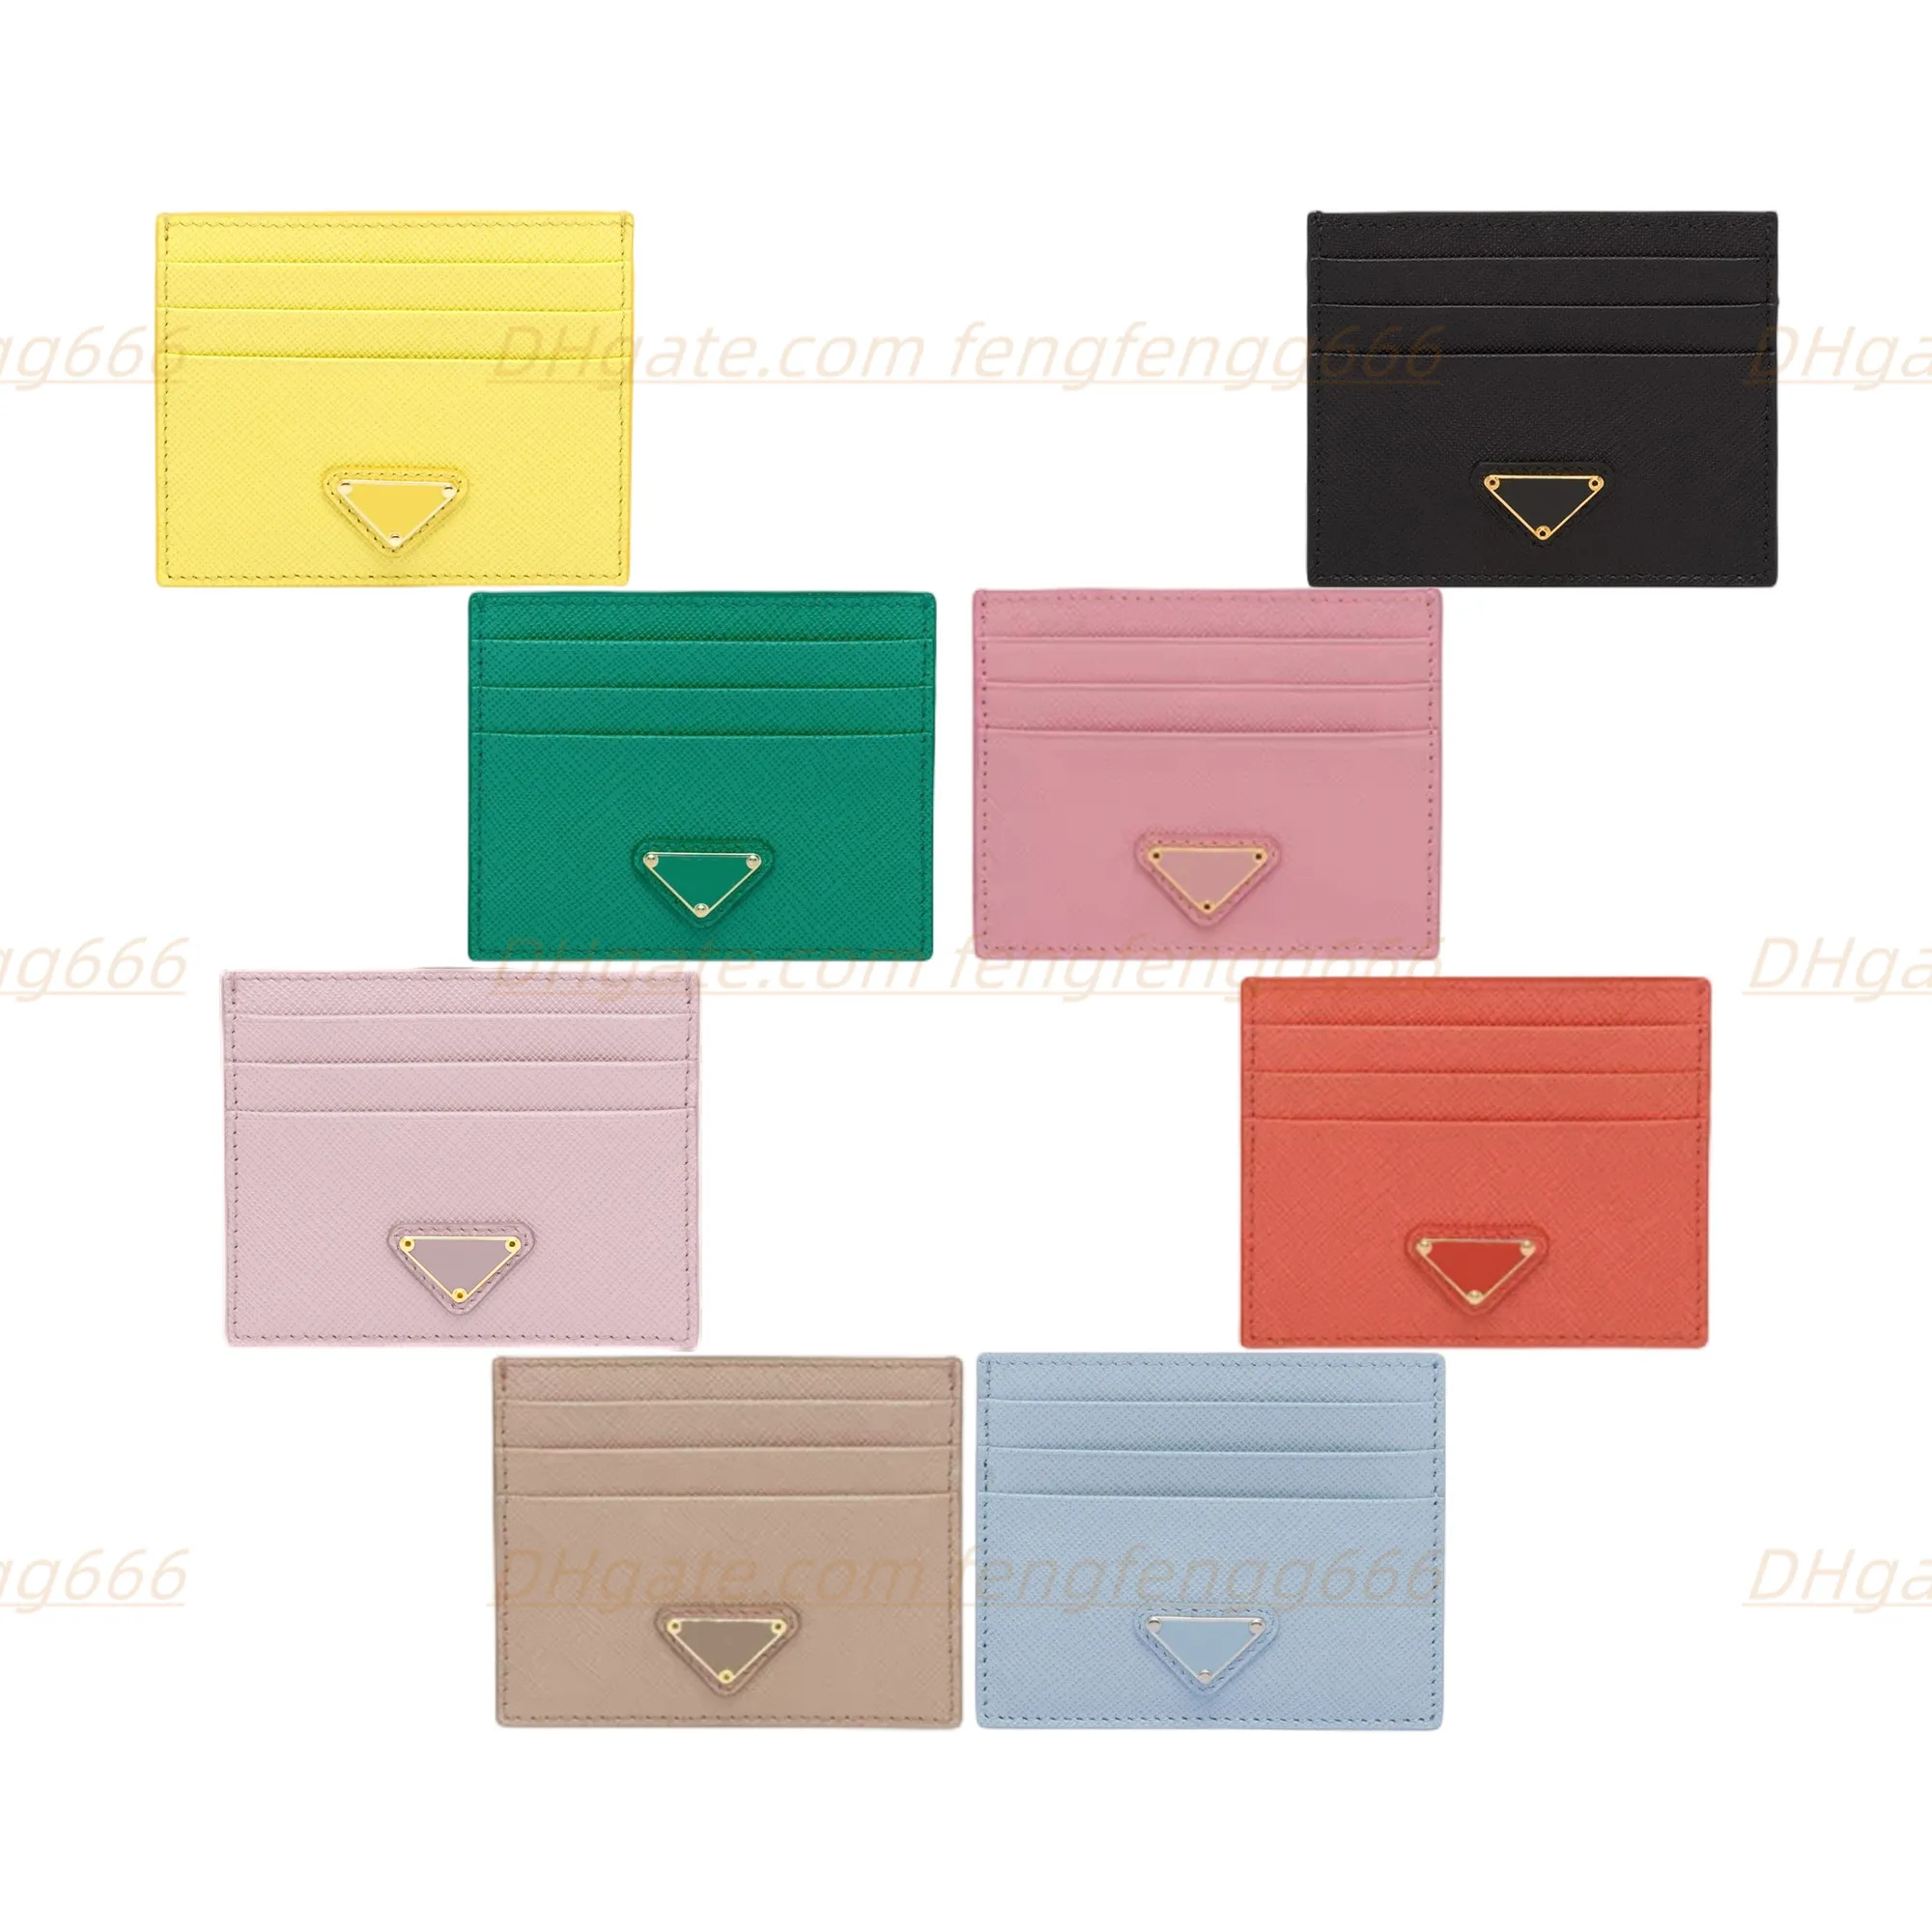 High Quality Card Holders Coin Purses Luxury Designer New Ladies Men Pure High End Wallet purses True Leather Fashion Cross Body cultch bags With original box